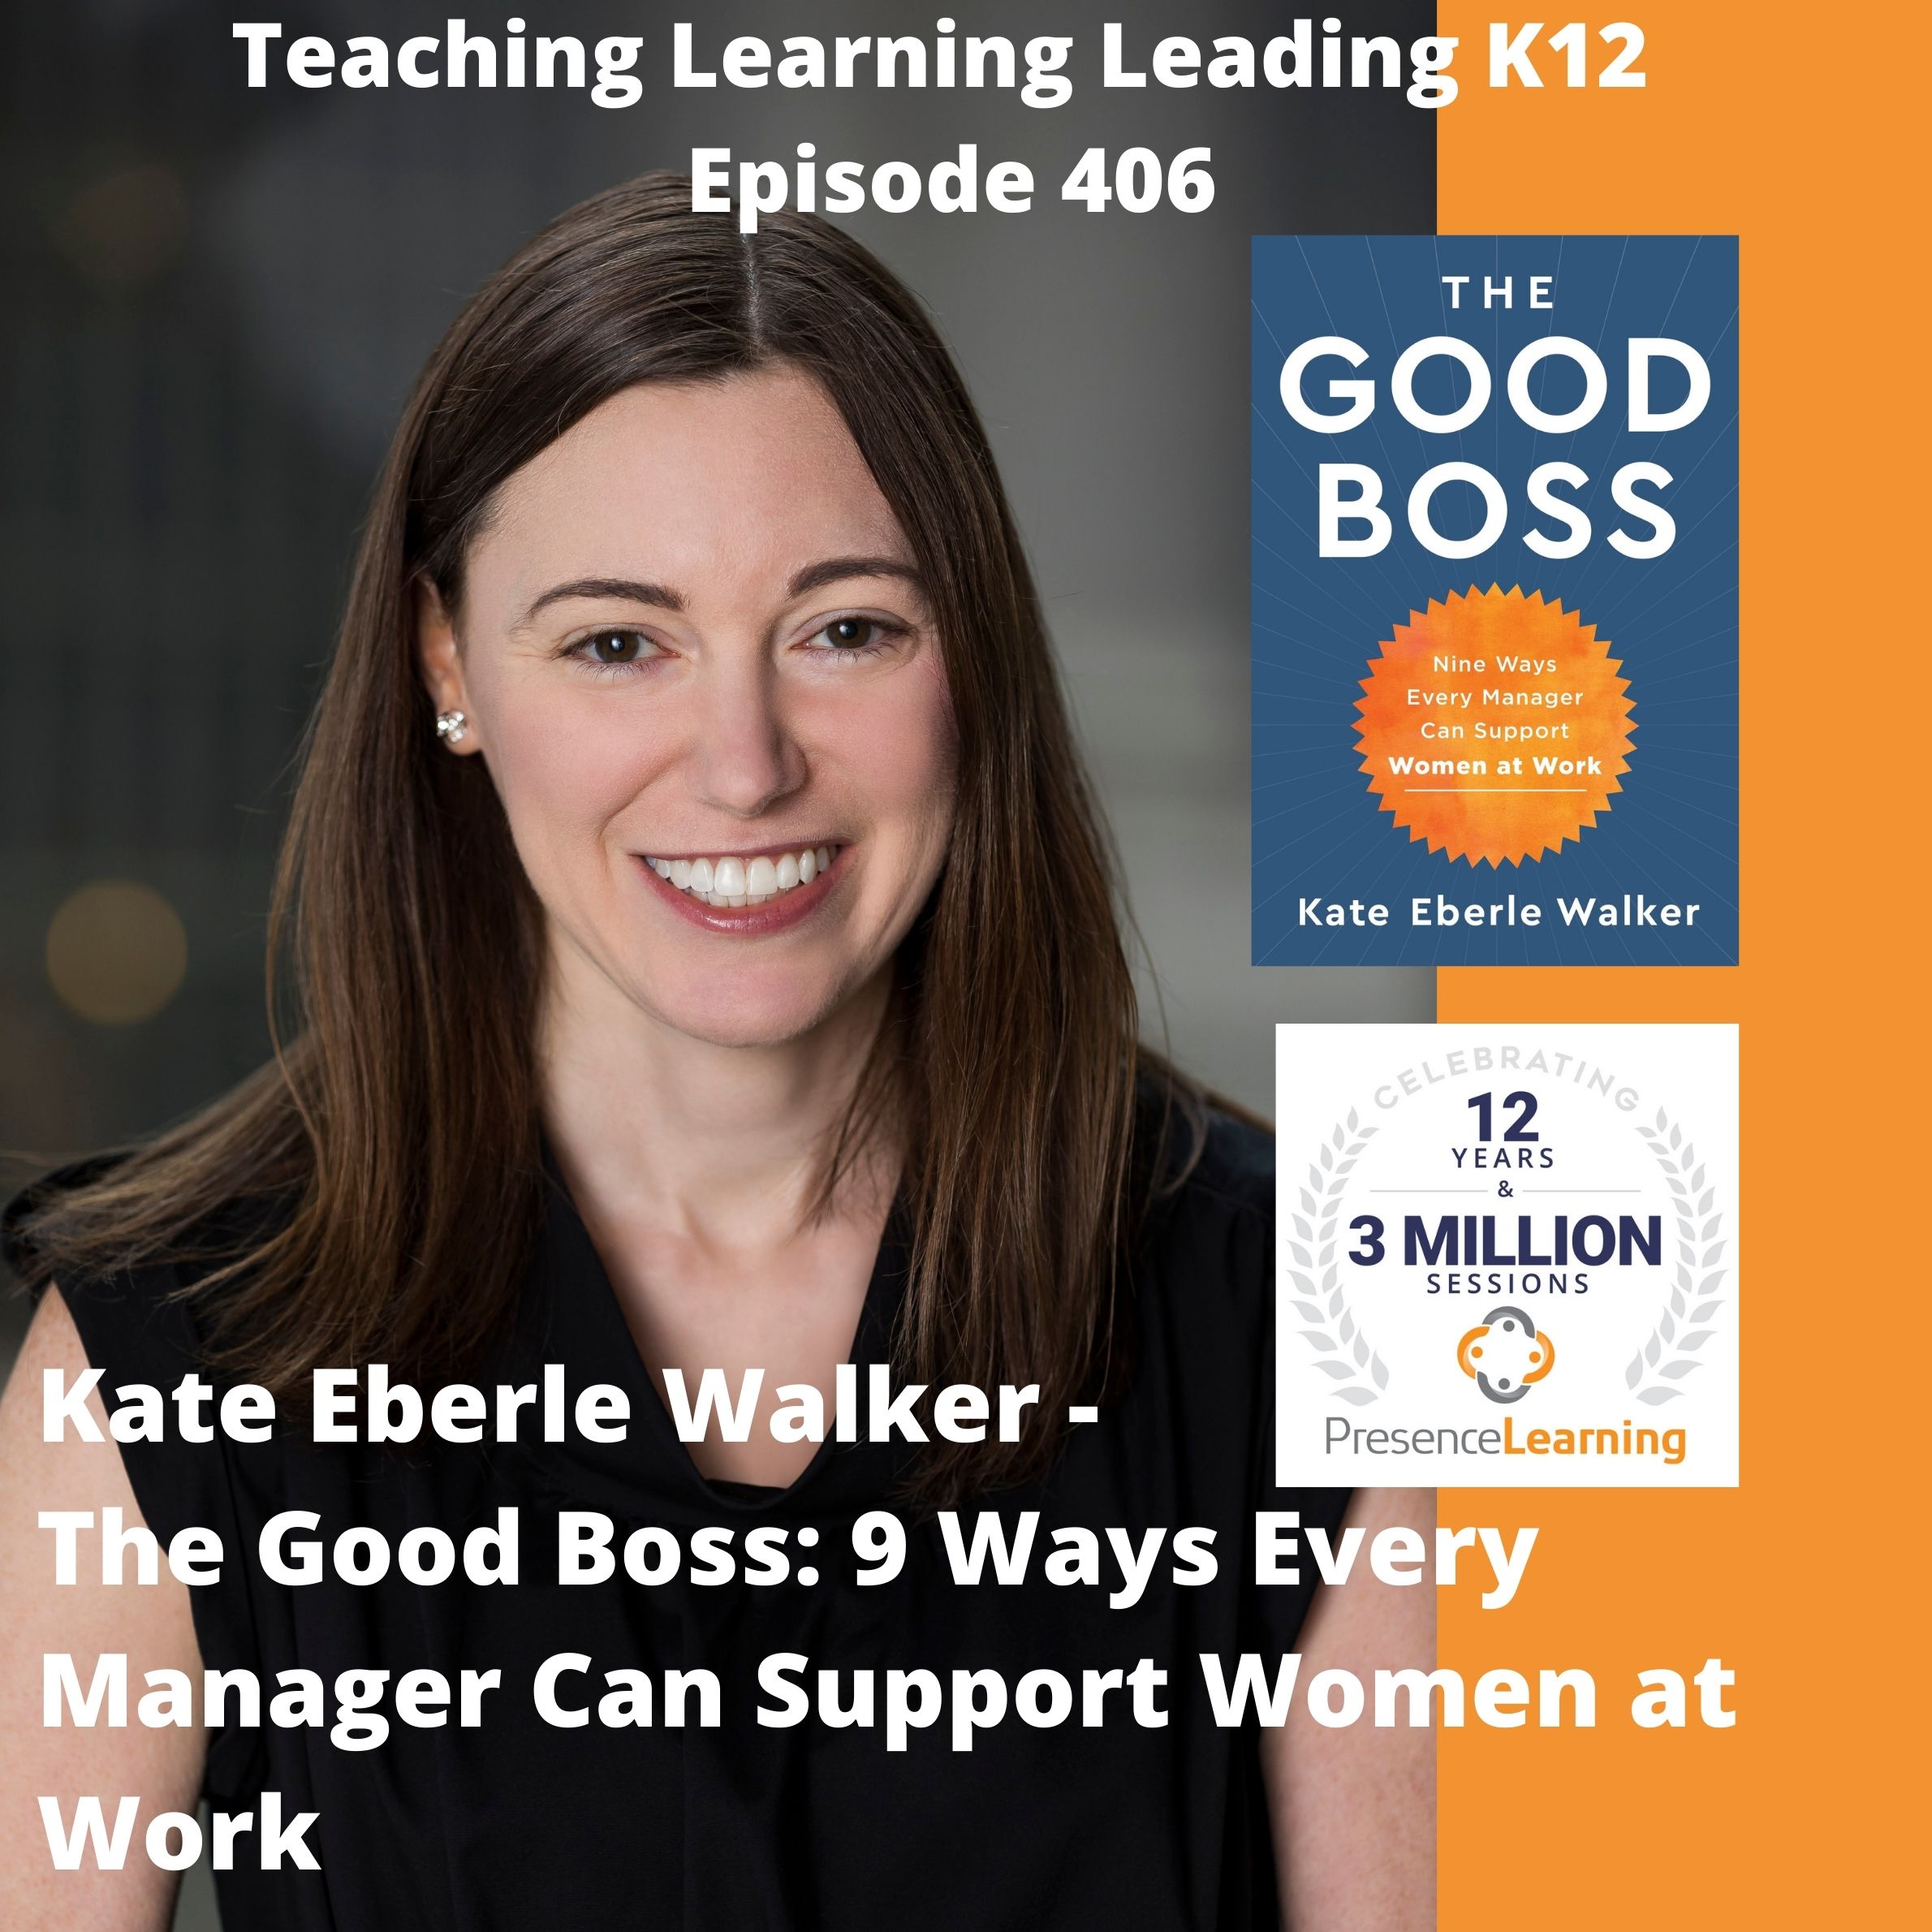 Kate Eberle Walker - The Good Boss: 9 Ways Every Manager Can Support Women at Work - 406 Image